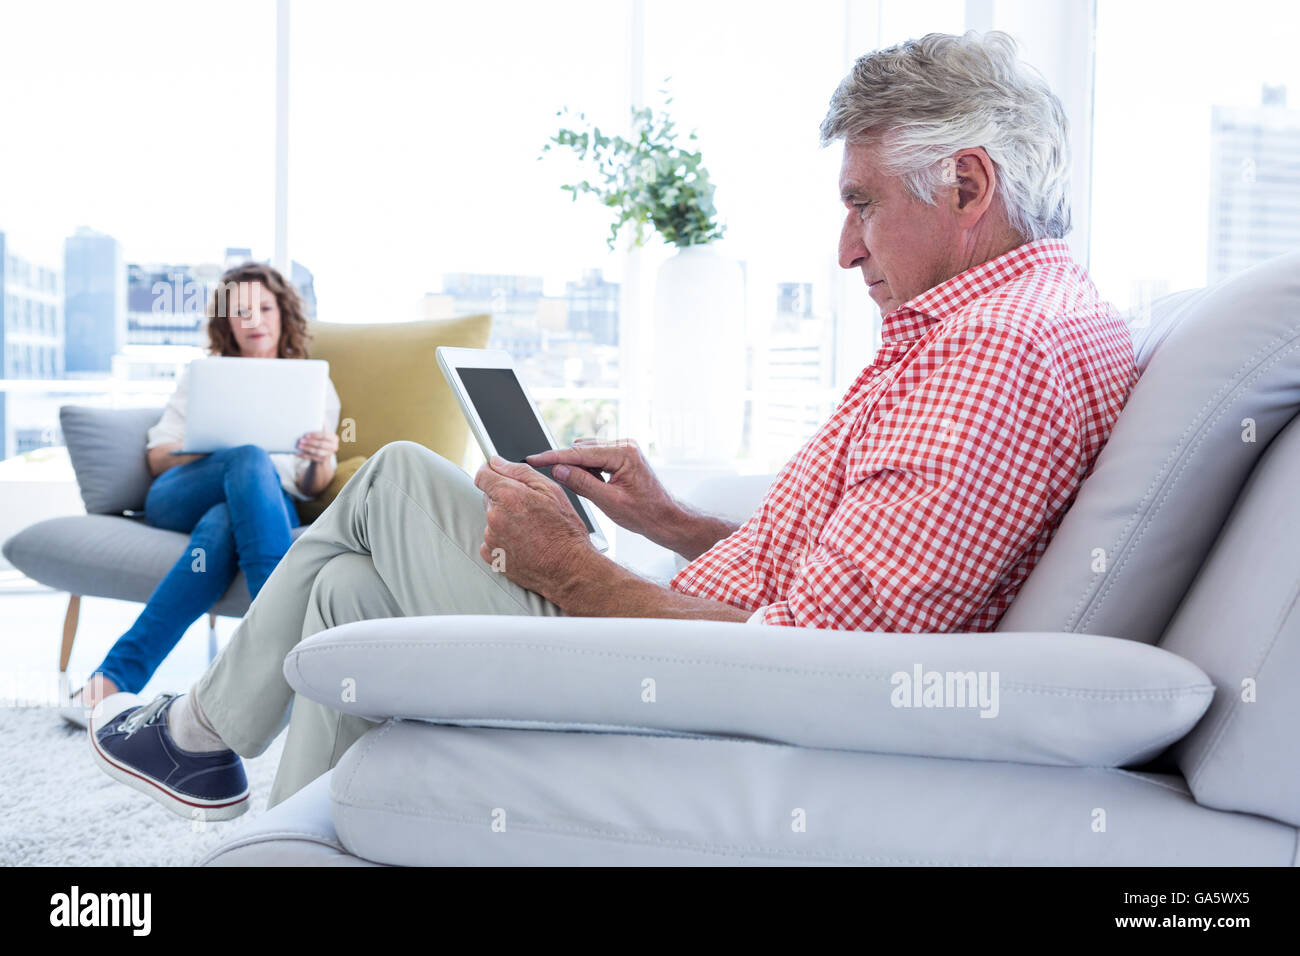 Mature man using tablet computer while sitting Stock Photo